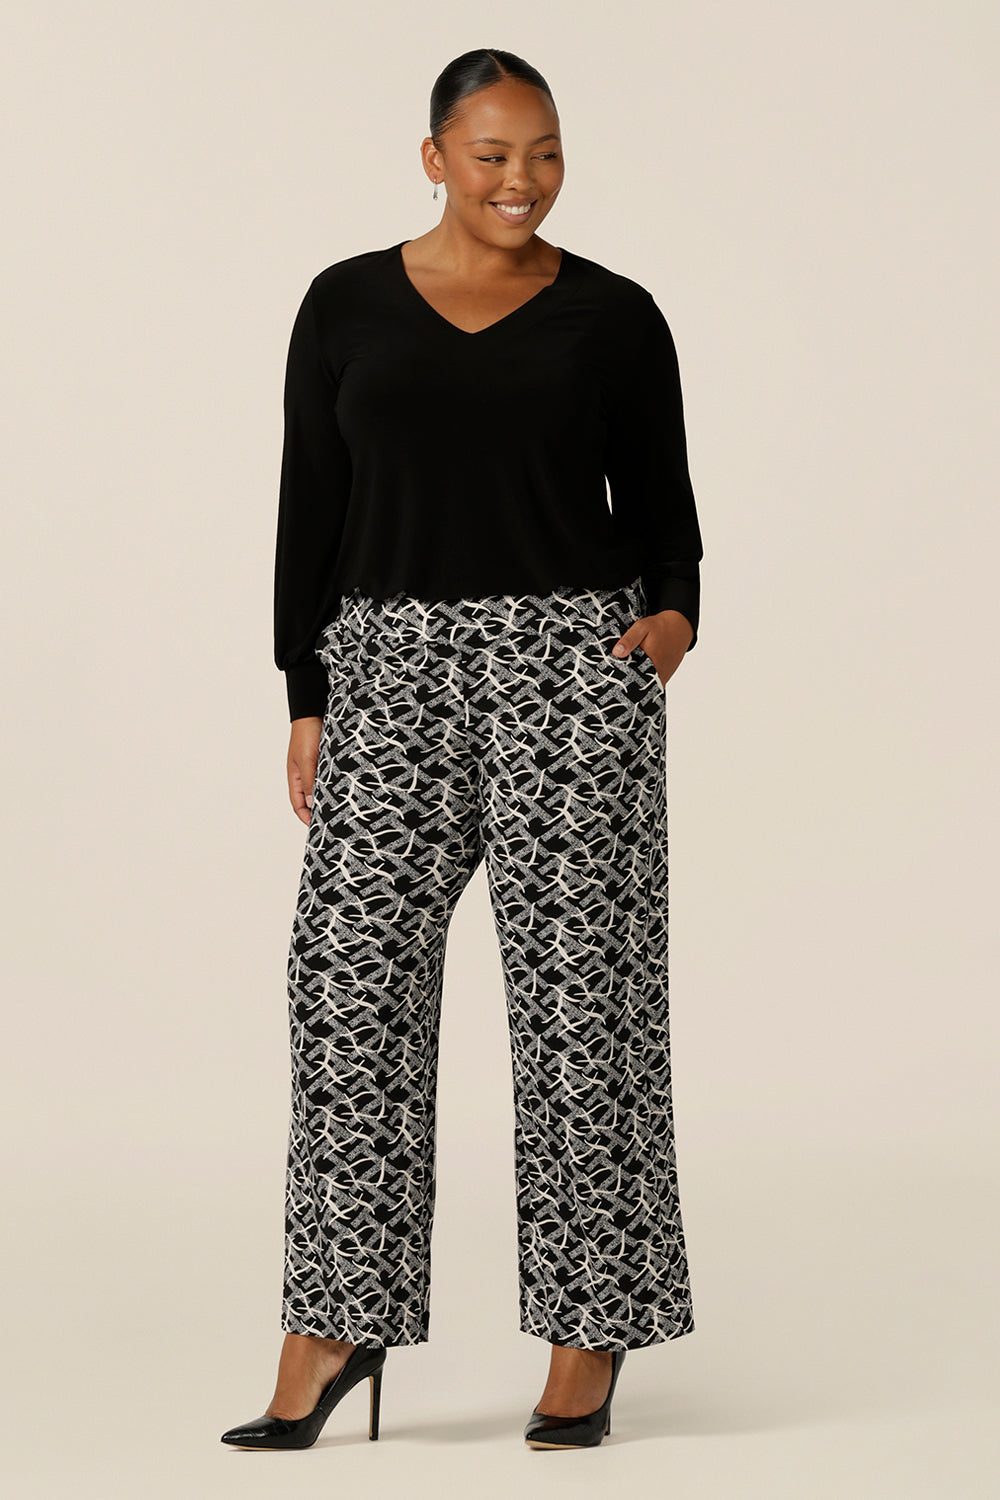 A plus size, size 18 woman wears wide leg, pull on pants with a deep waistband in black and white jersey. Worn with a long sleeve black top, these easy care pants are great for work and corporate wear.